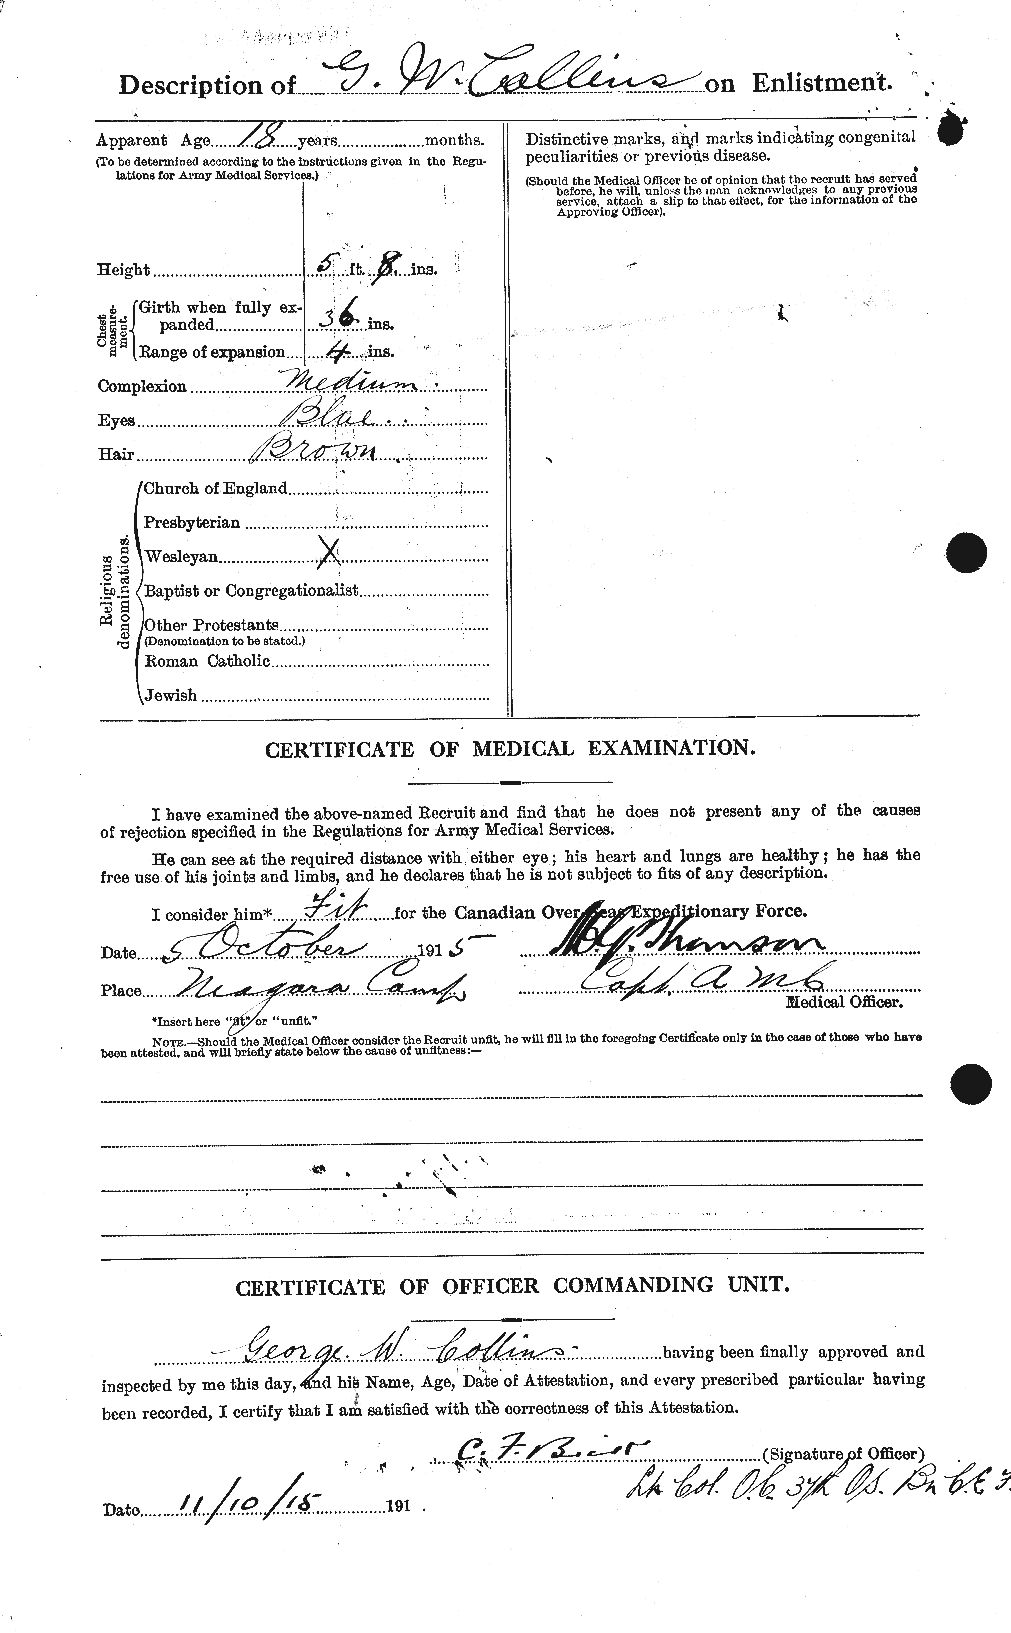 Personnel Records of the First World War - CEF 070528b